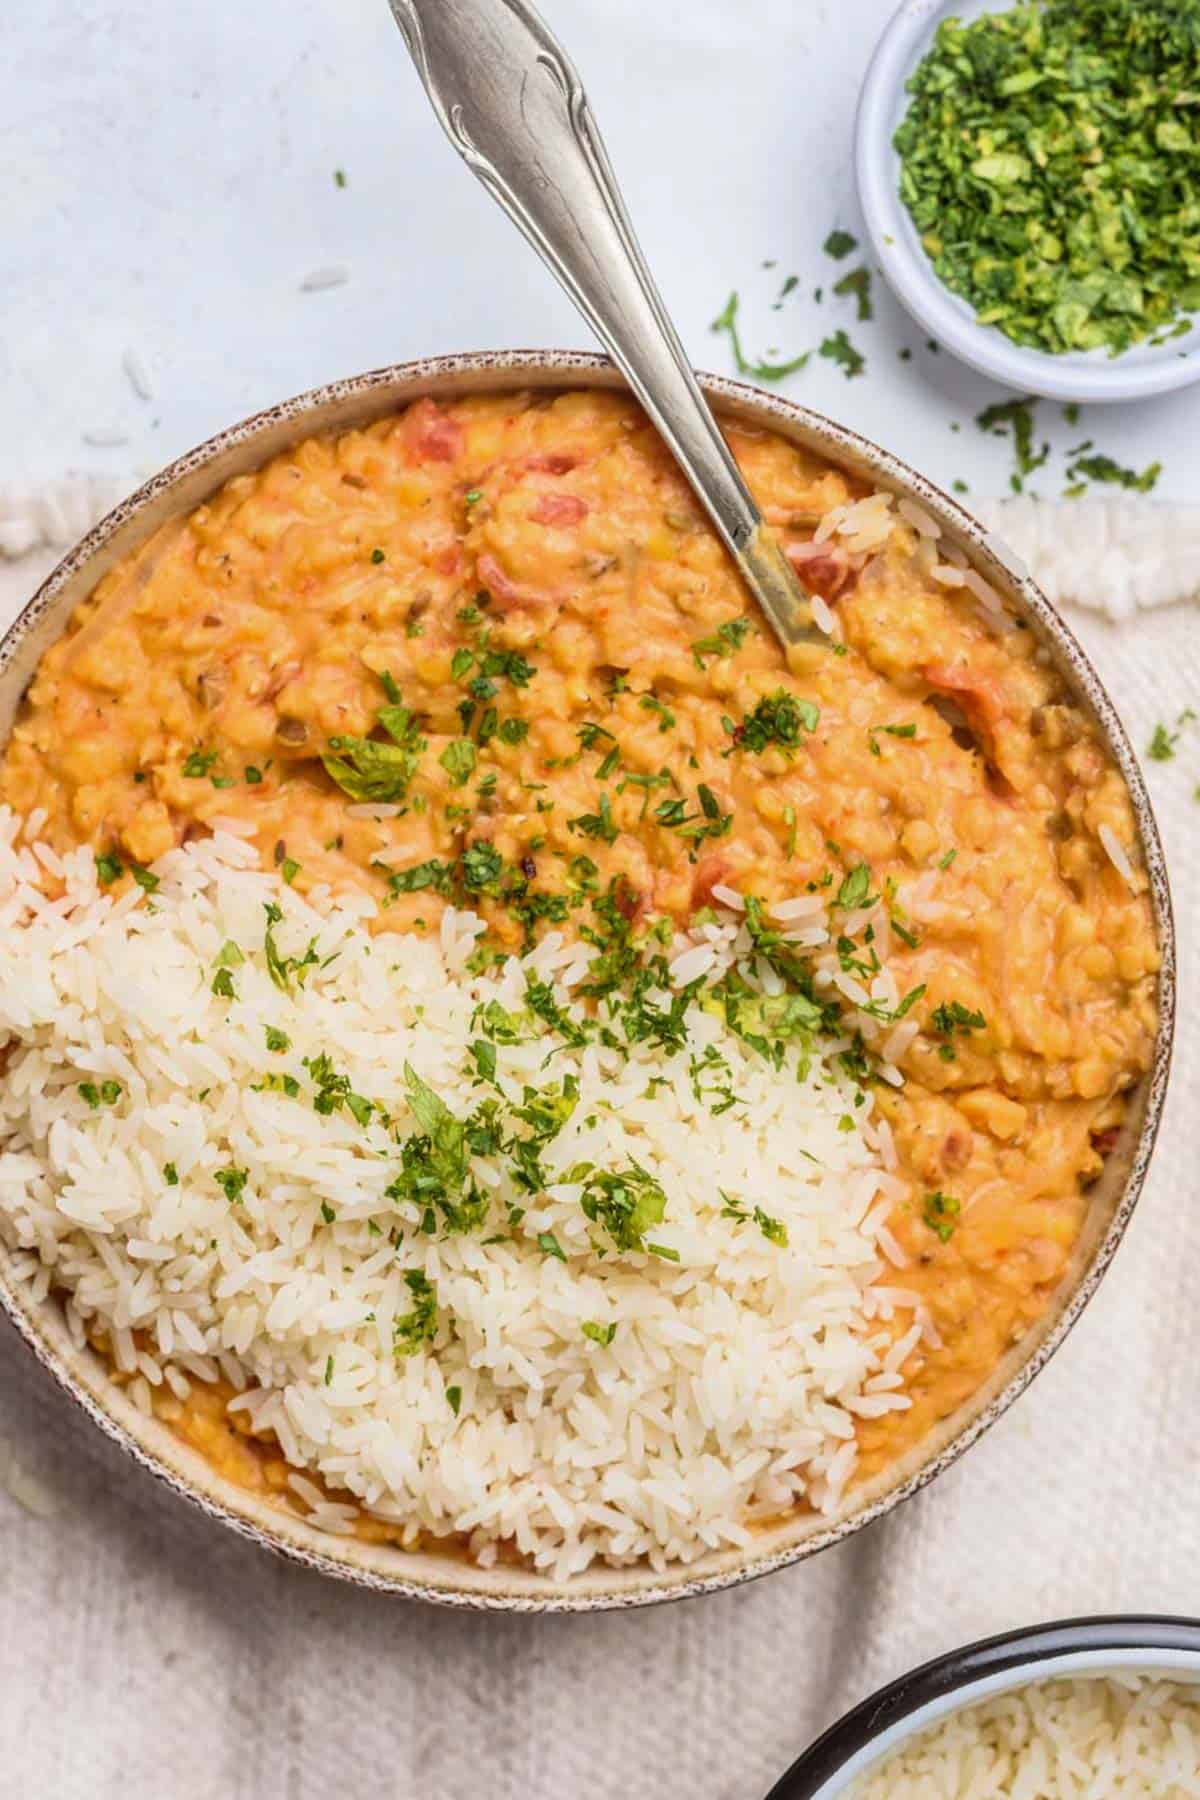 Red lentil dal with white rice in a bowl with a spoon.